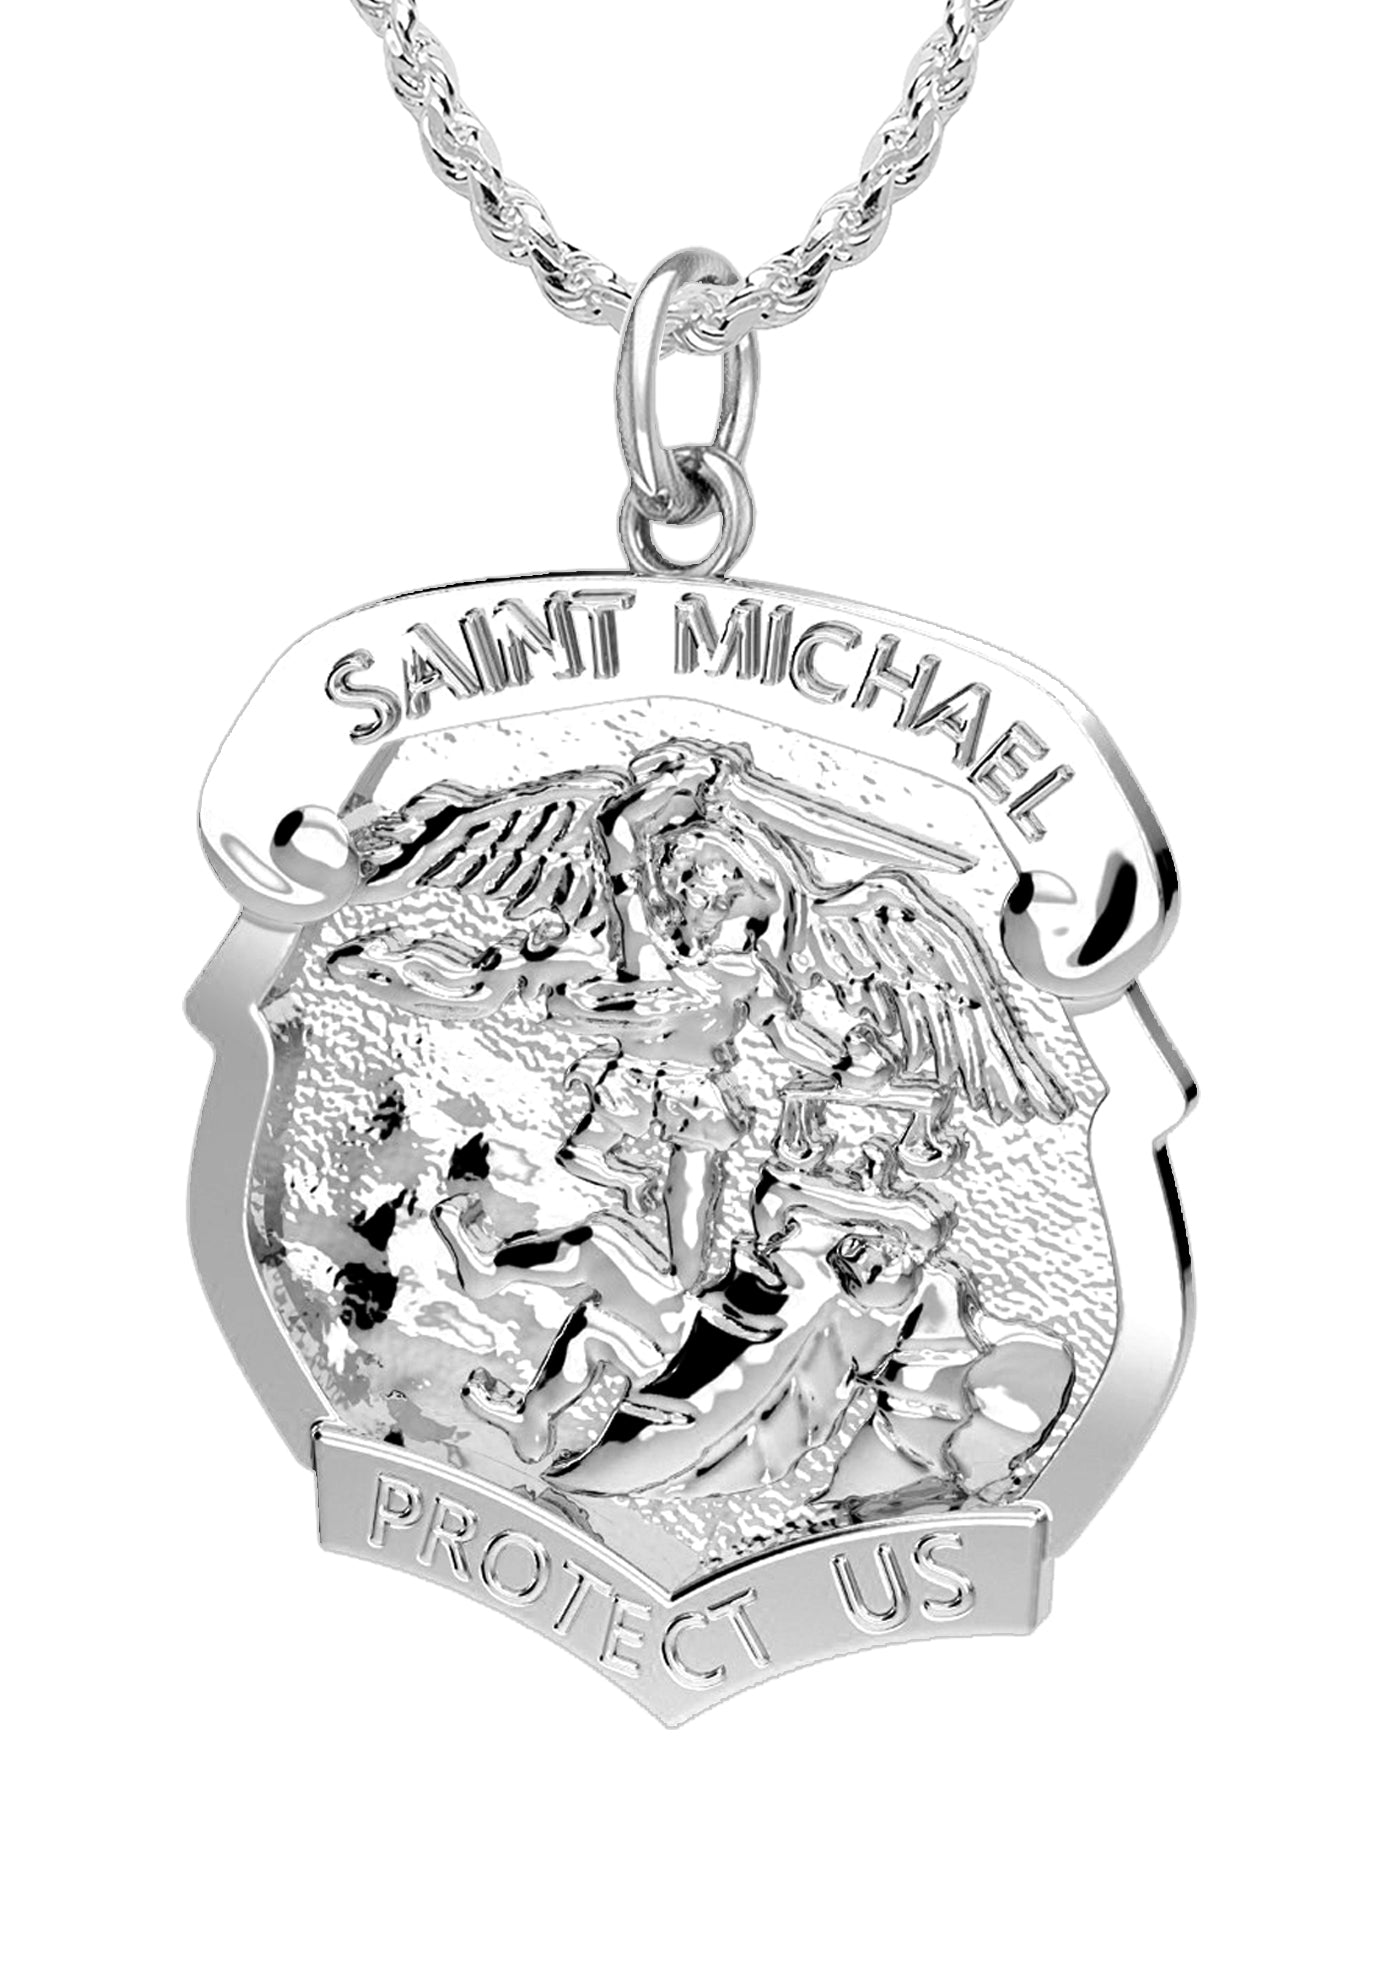 Ladies 925 Sterling Silver Saint Michael High Polished Shield Badge Pendant Necklace, 28mm - US Jewels